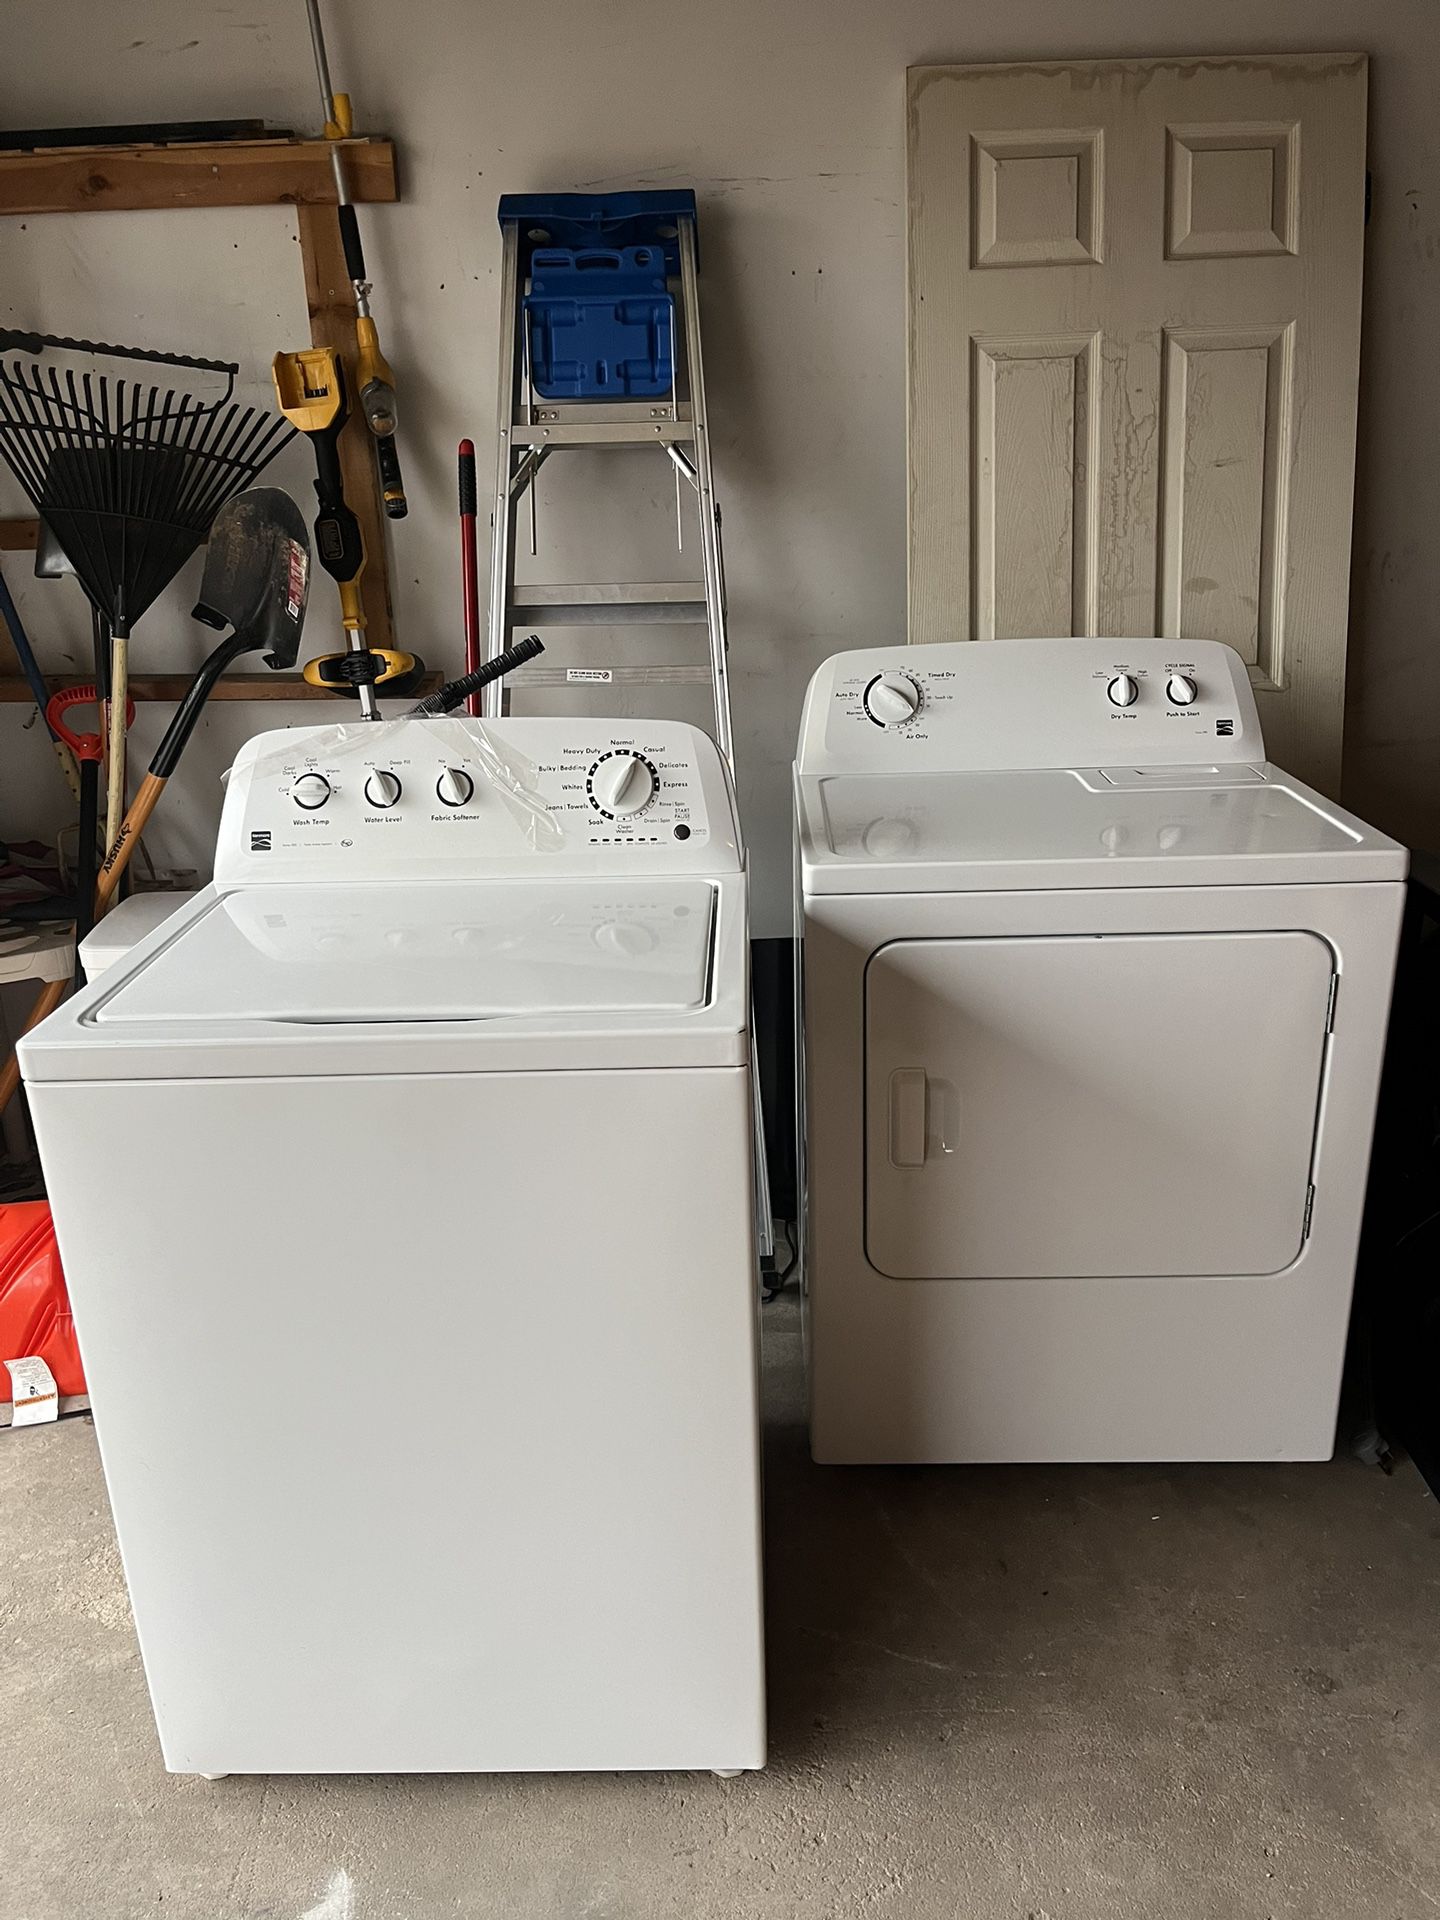 Kenmore Washer And Dryer Set $450